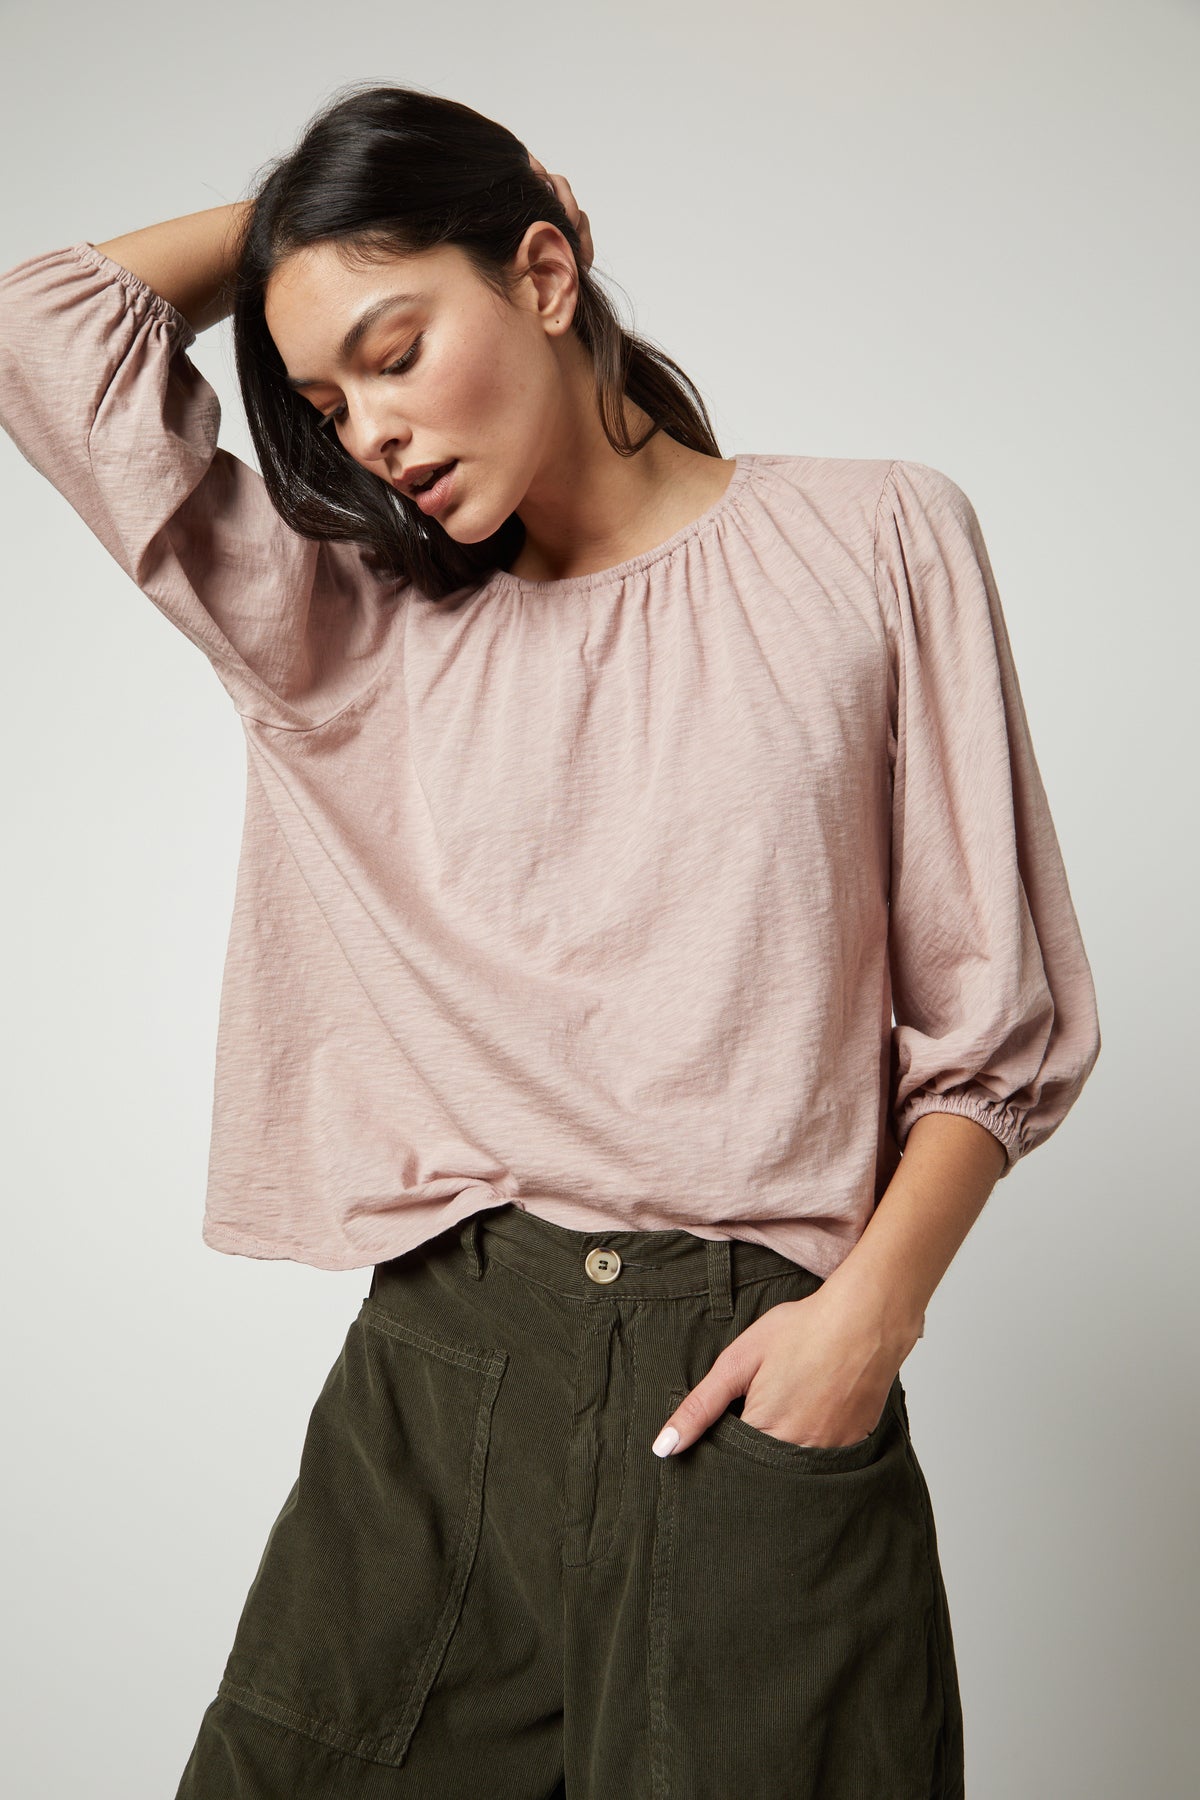 The model is wearing a Velvet by Graham & Spencer JULIE 3/4 SLEEVE TEE top and olive pants.-26727740309697